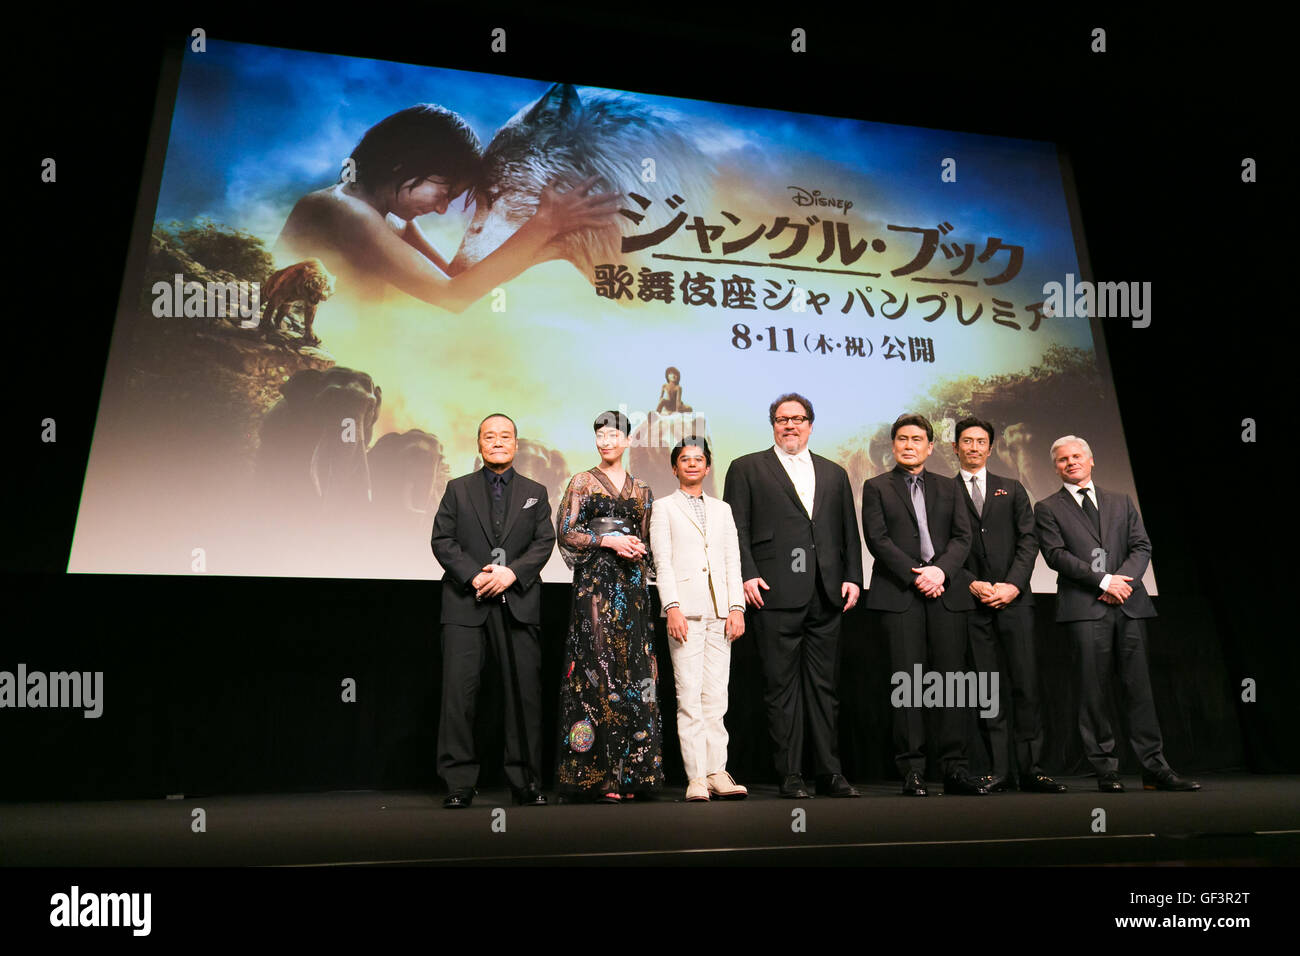 Tokyo, Japan. 27th July, 2016.(L to R) Actor Toshiyuki Nishida, actress Rie Miyazawa, child actor Neel Sethi, director Jon Favreau, kabuki actor Matsumoto Koshiro IX, actor Yusuke Iseya and producer Brigham Taylor pose for the cameras during the Japanese premiere for the film The Jungle Book at Kabuki-za theater in Ginza on July 27, 2016, Tokyo, Japan. Sethi, Favreau, Taylor and Japanese voice cast appeared on the stage to greet the fans. The movie will be released in Japan on August 11. Credit:  Rodrigo Reyes Marin/AFLO/Alamy Live News Stock Photo